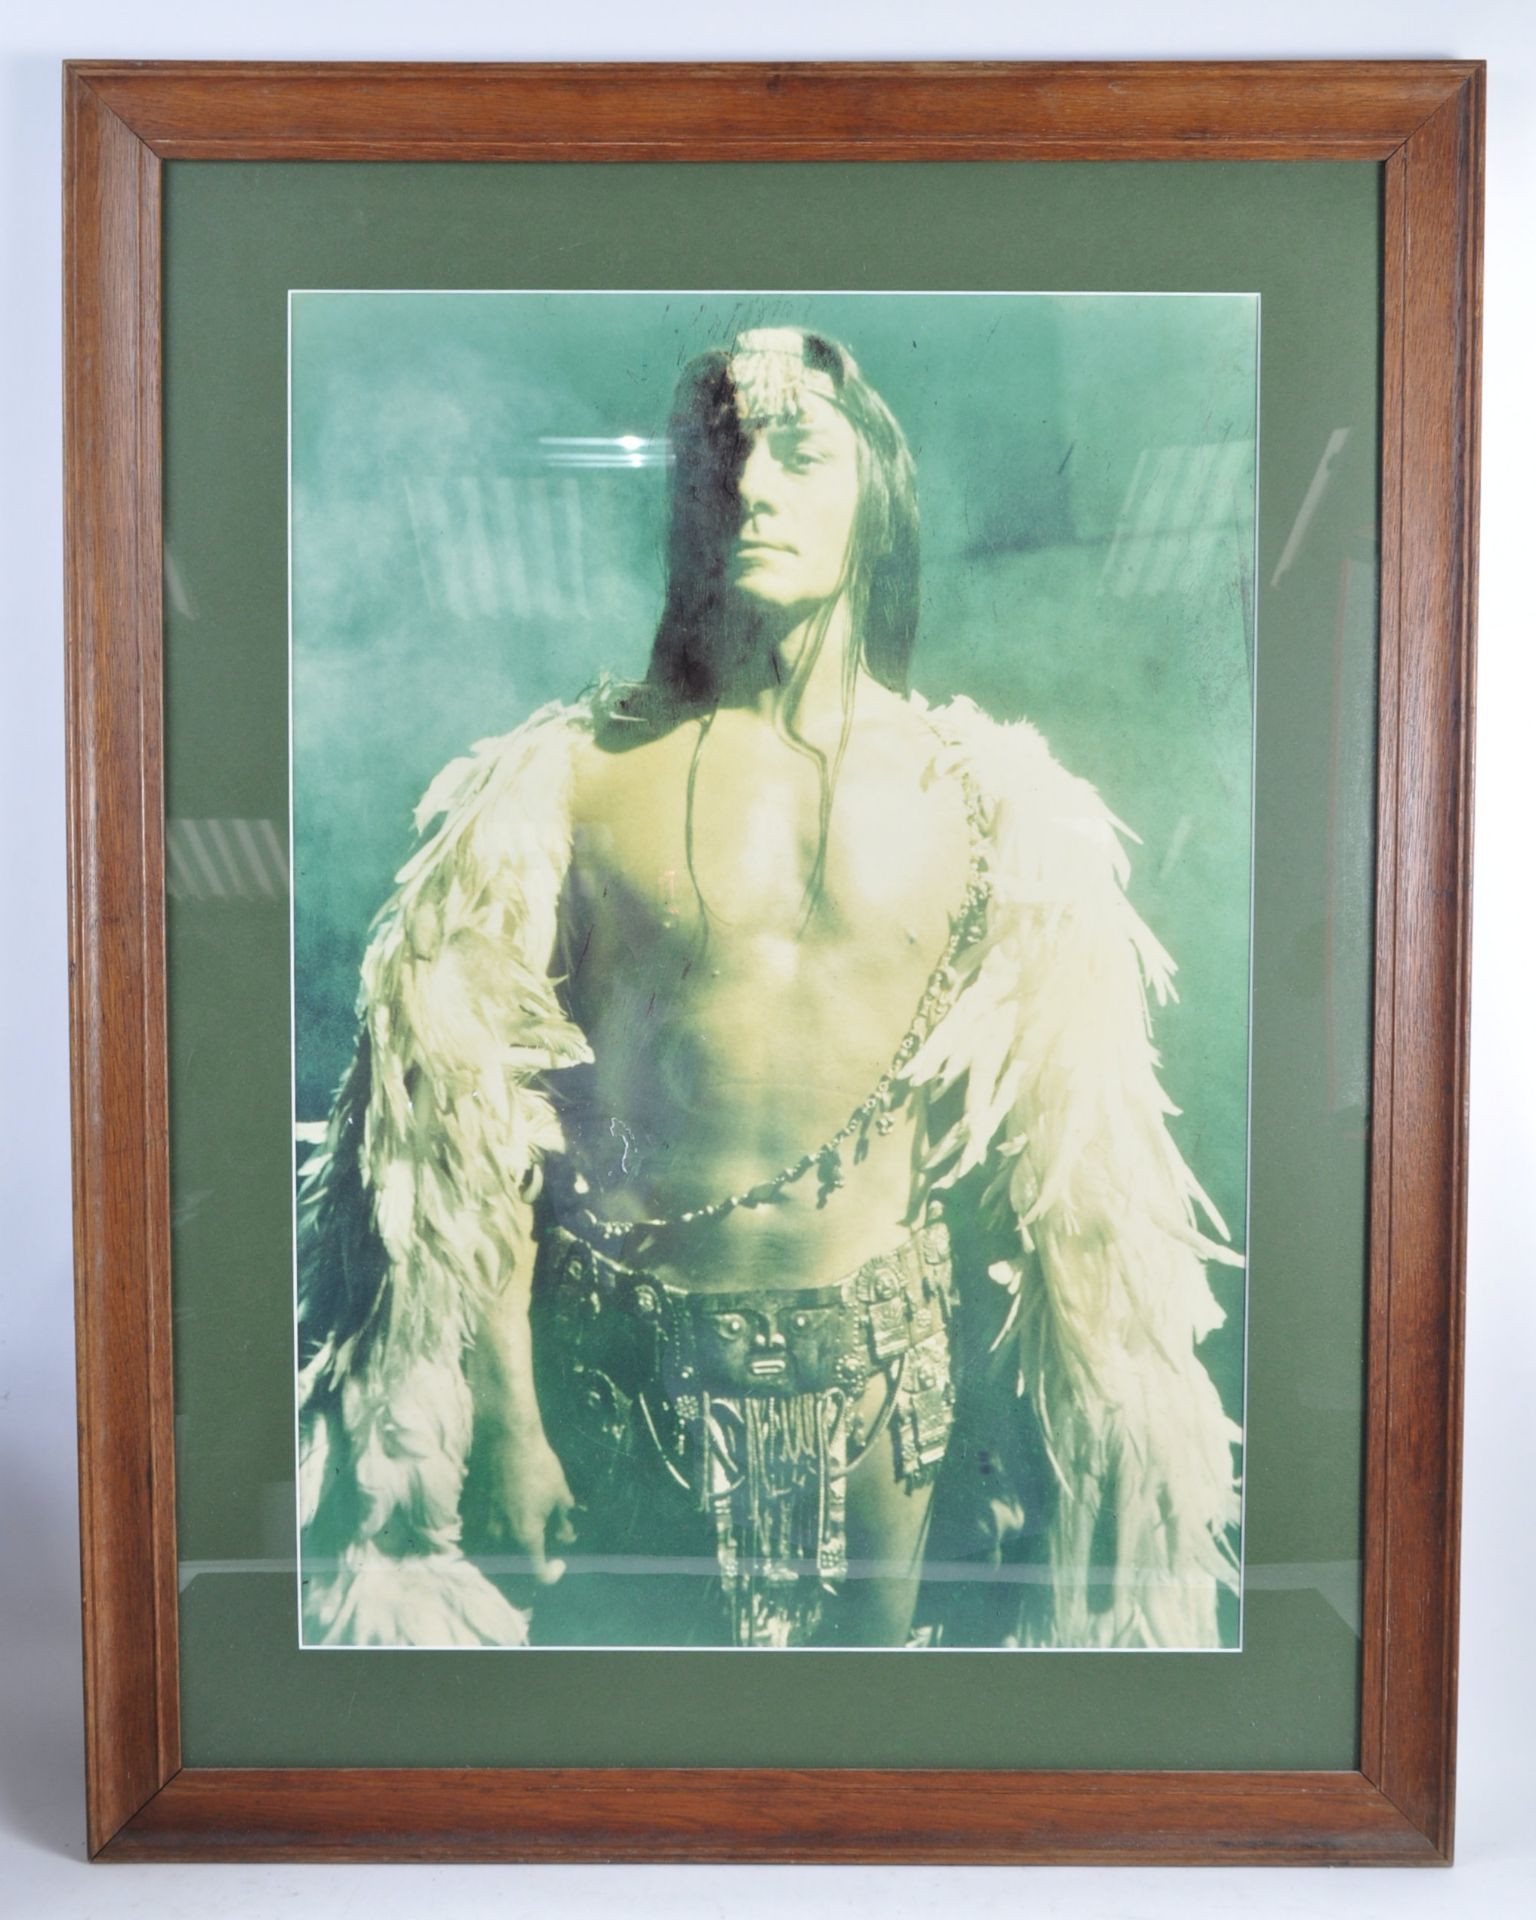 ESTATE OF DAVE PROWSE - ROYAL HUNT OF THE SUN - LARGE PRINT